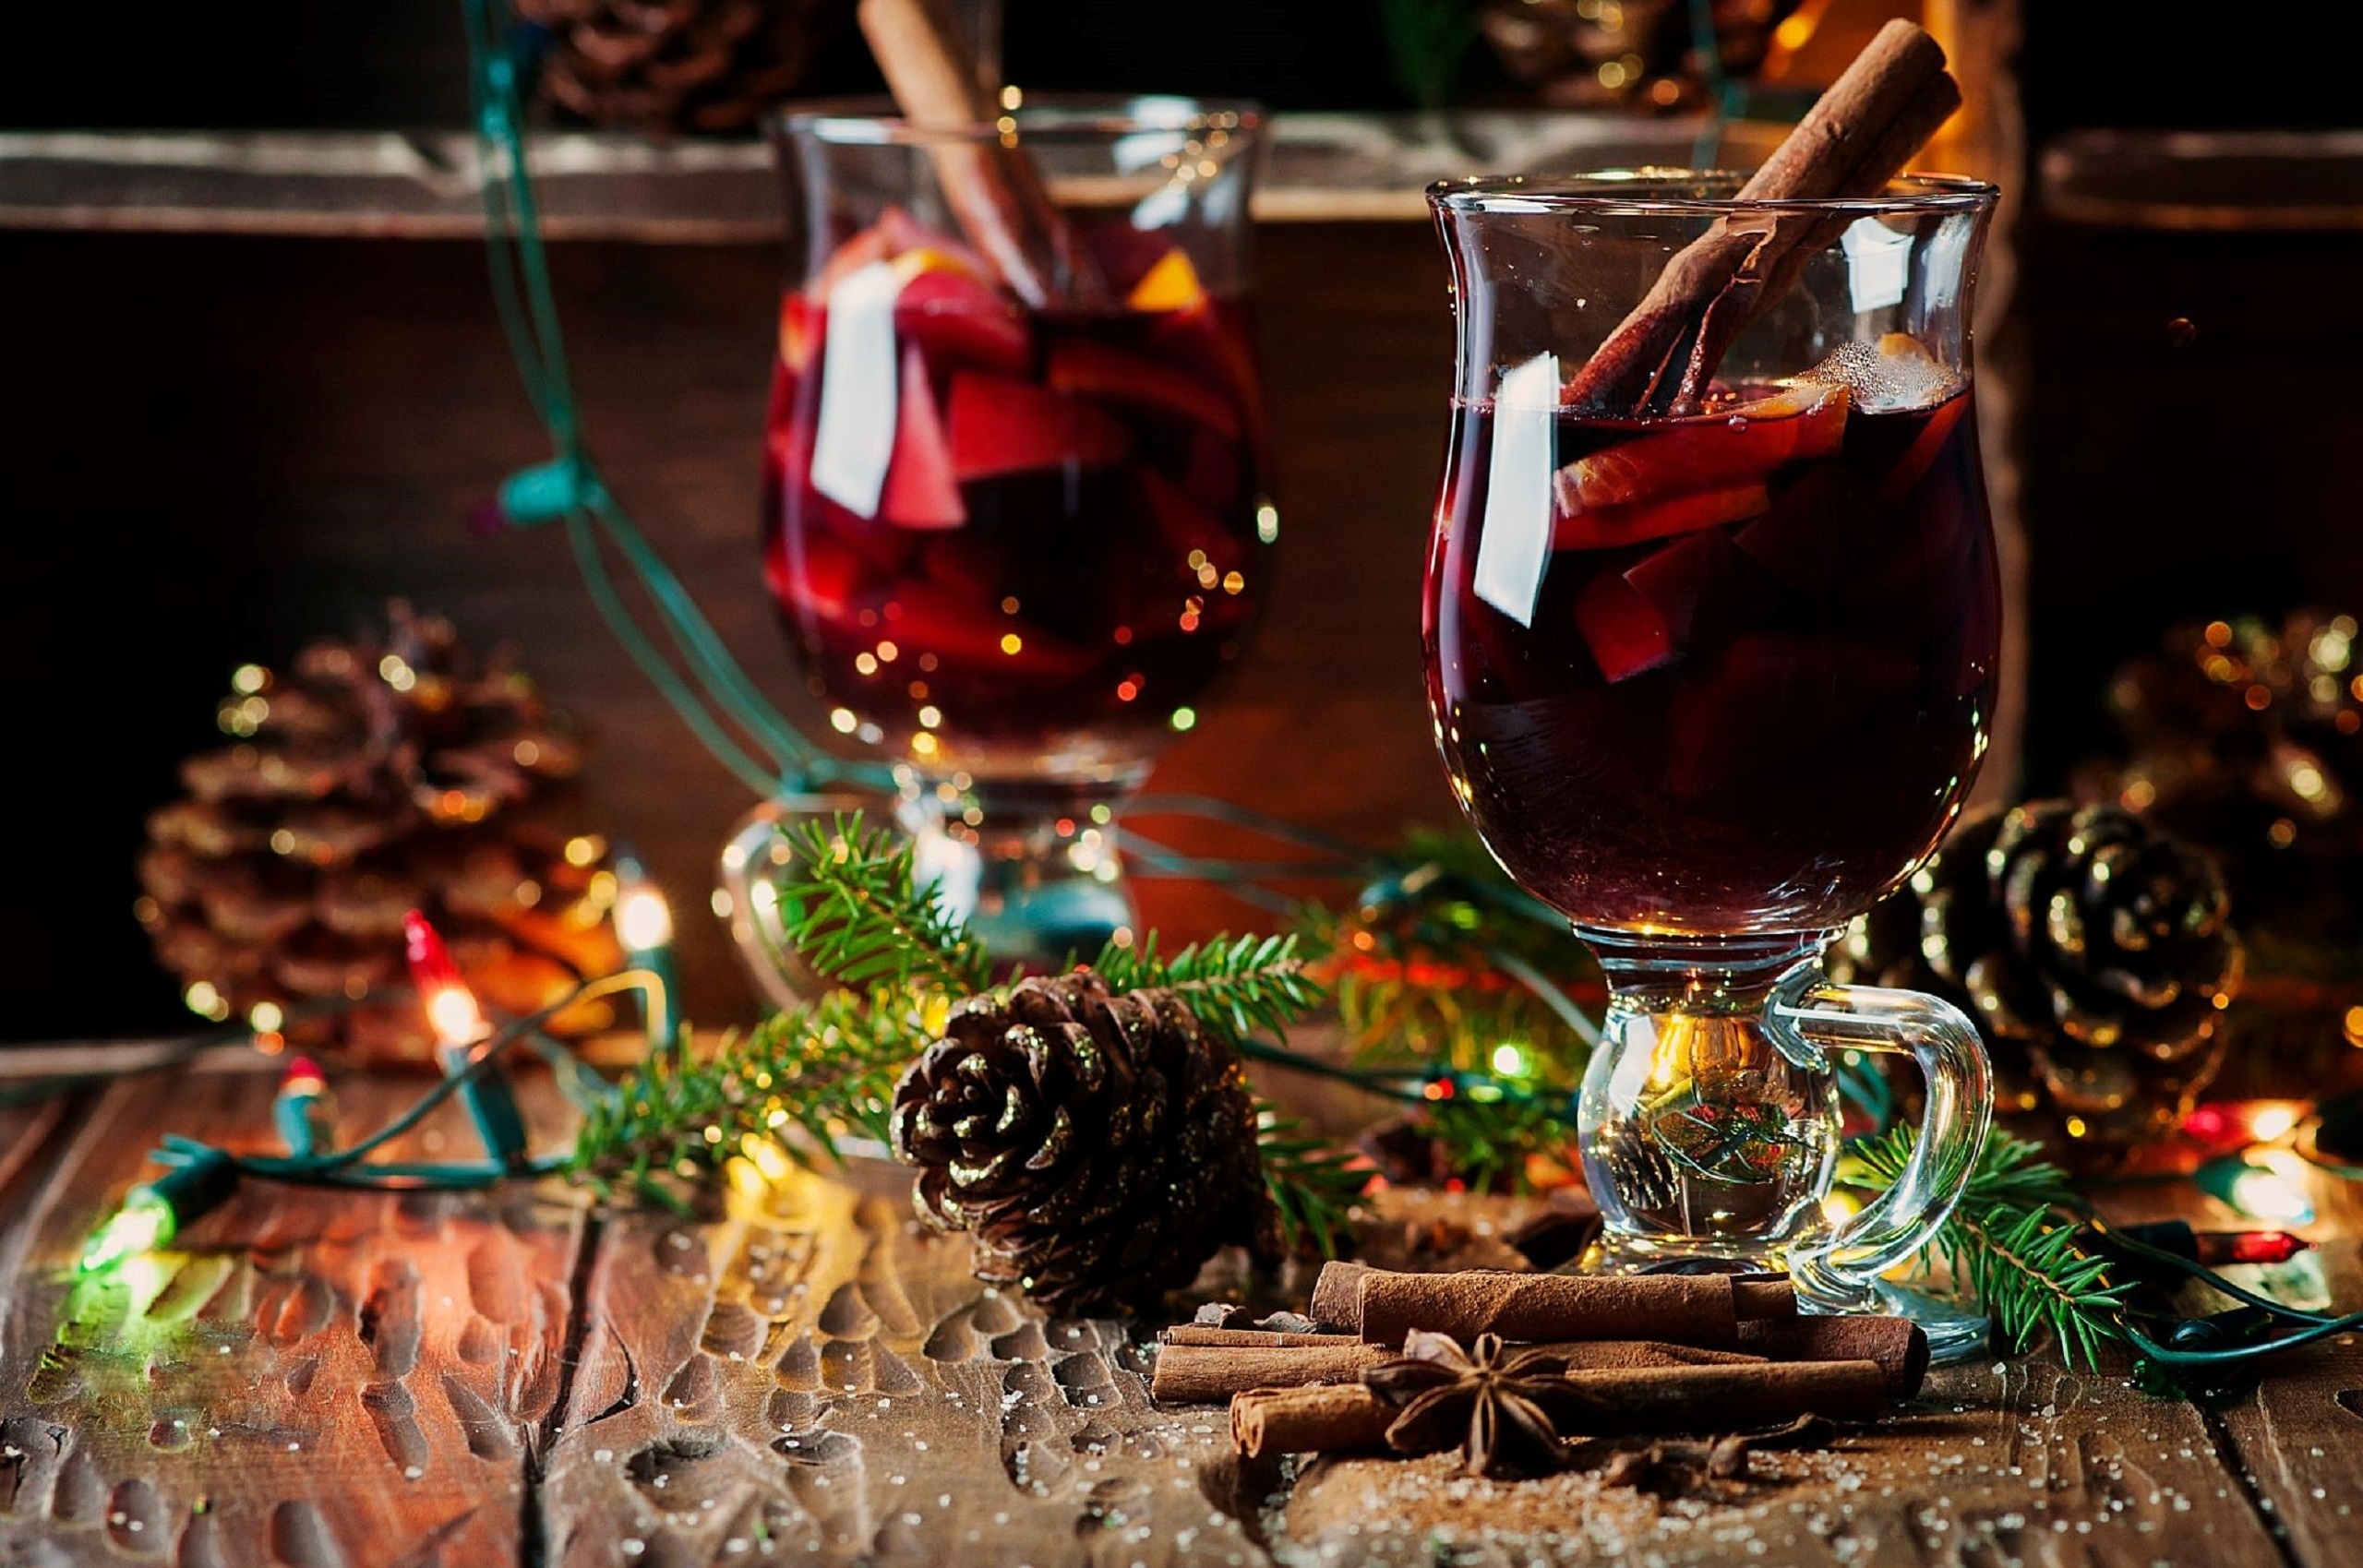 Wallpaper | Beautiful pictures | photo | picture | New year, mulled wine,  Christmas decorations, Oxana Denezhkina